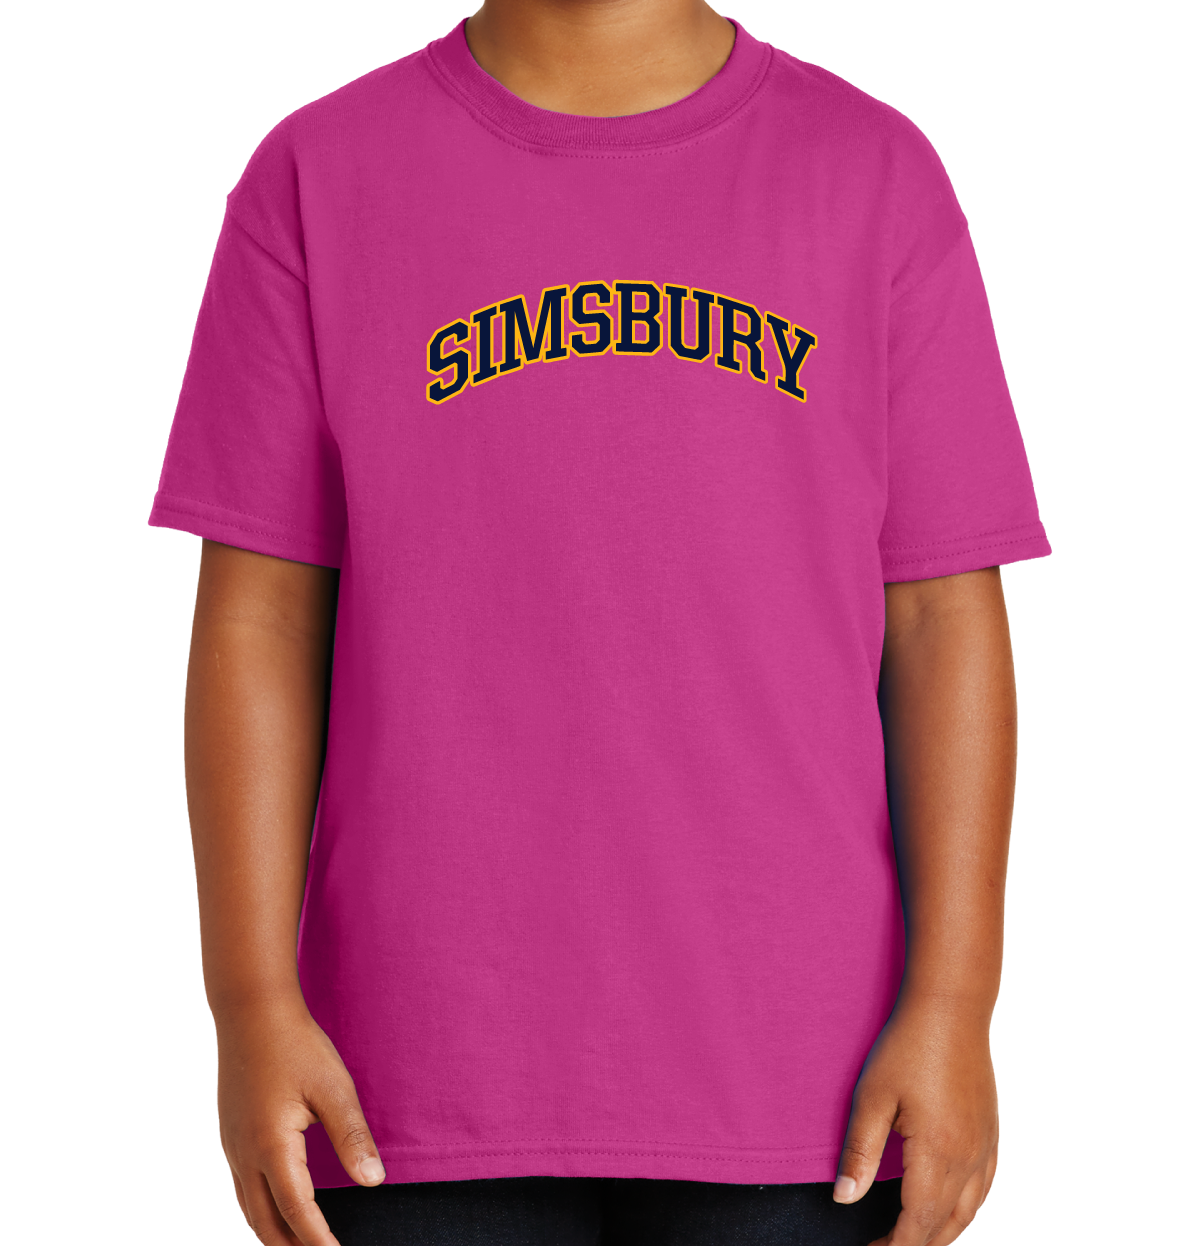 T-Shirt: Simsbury 2 Color (YOUTH Sizes)